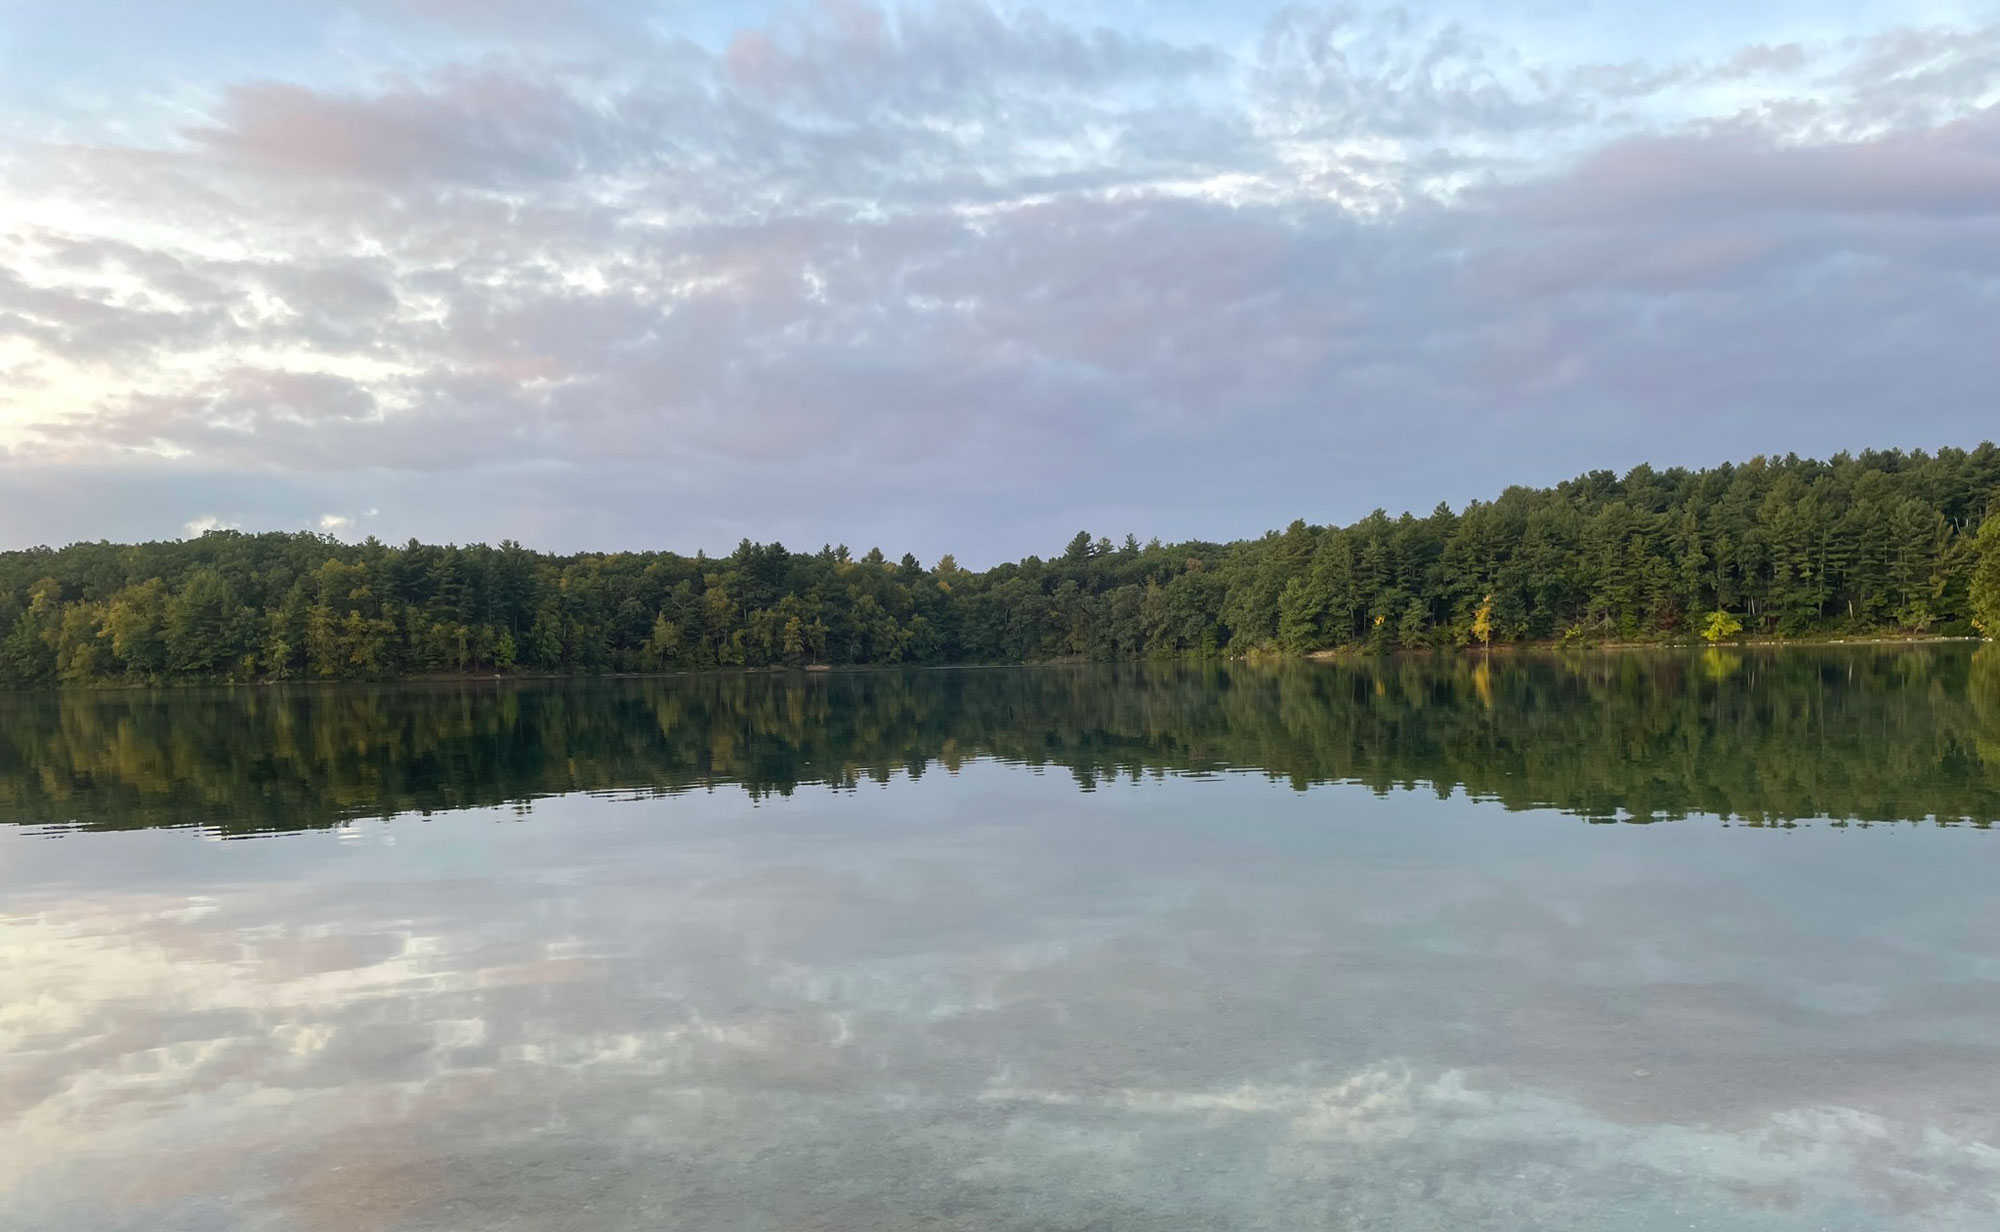 Photograph of Walden Pond, Massachusetts. The photograph shows placid water in the foreground, with a forest of green trees on the shoreline in the background. The trees are reflected in the water. Overhead, the sky is blue-gray with a think layer of clouds.